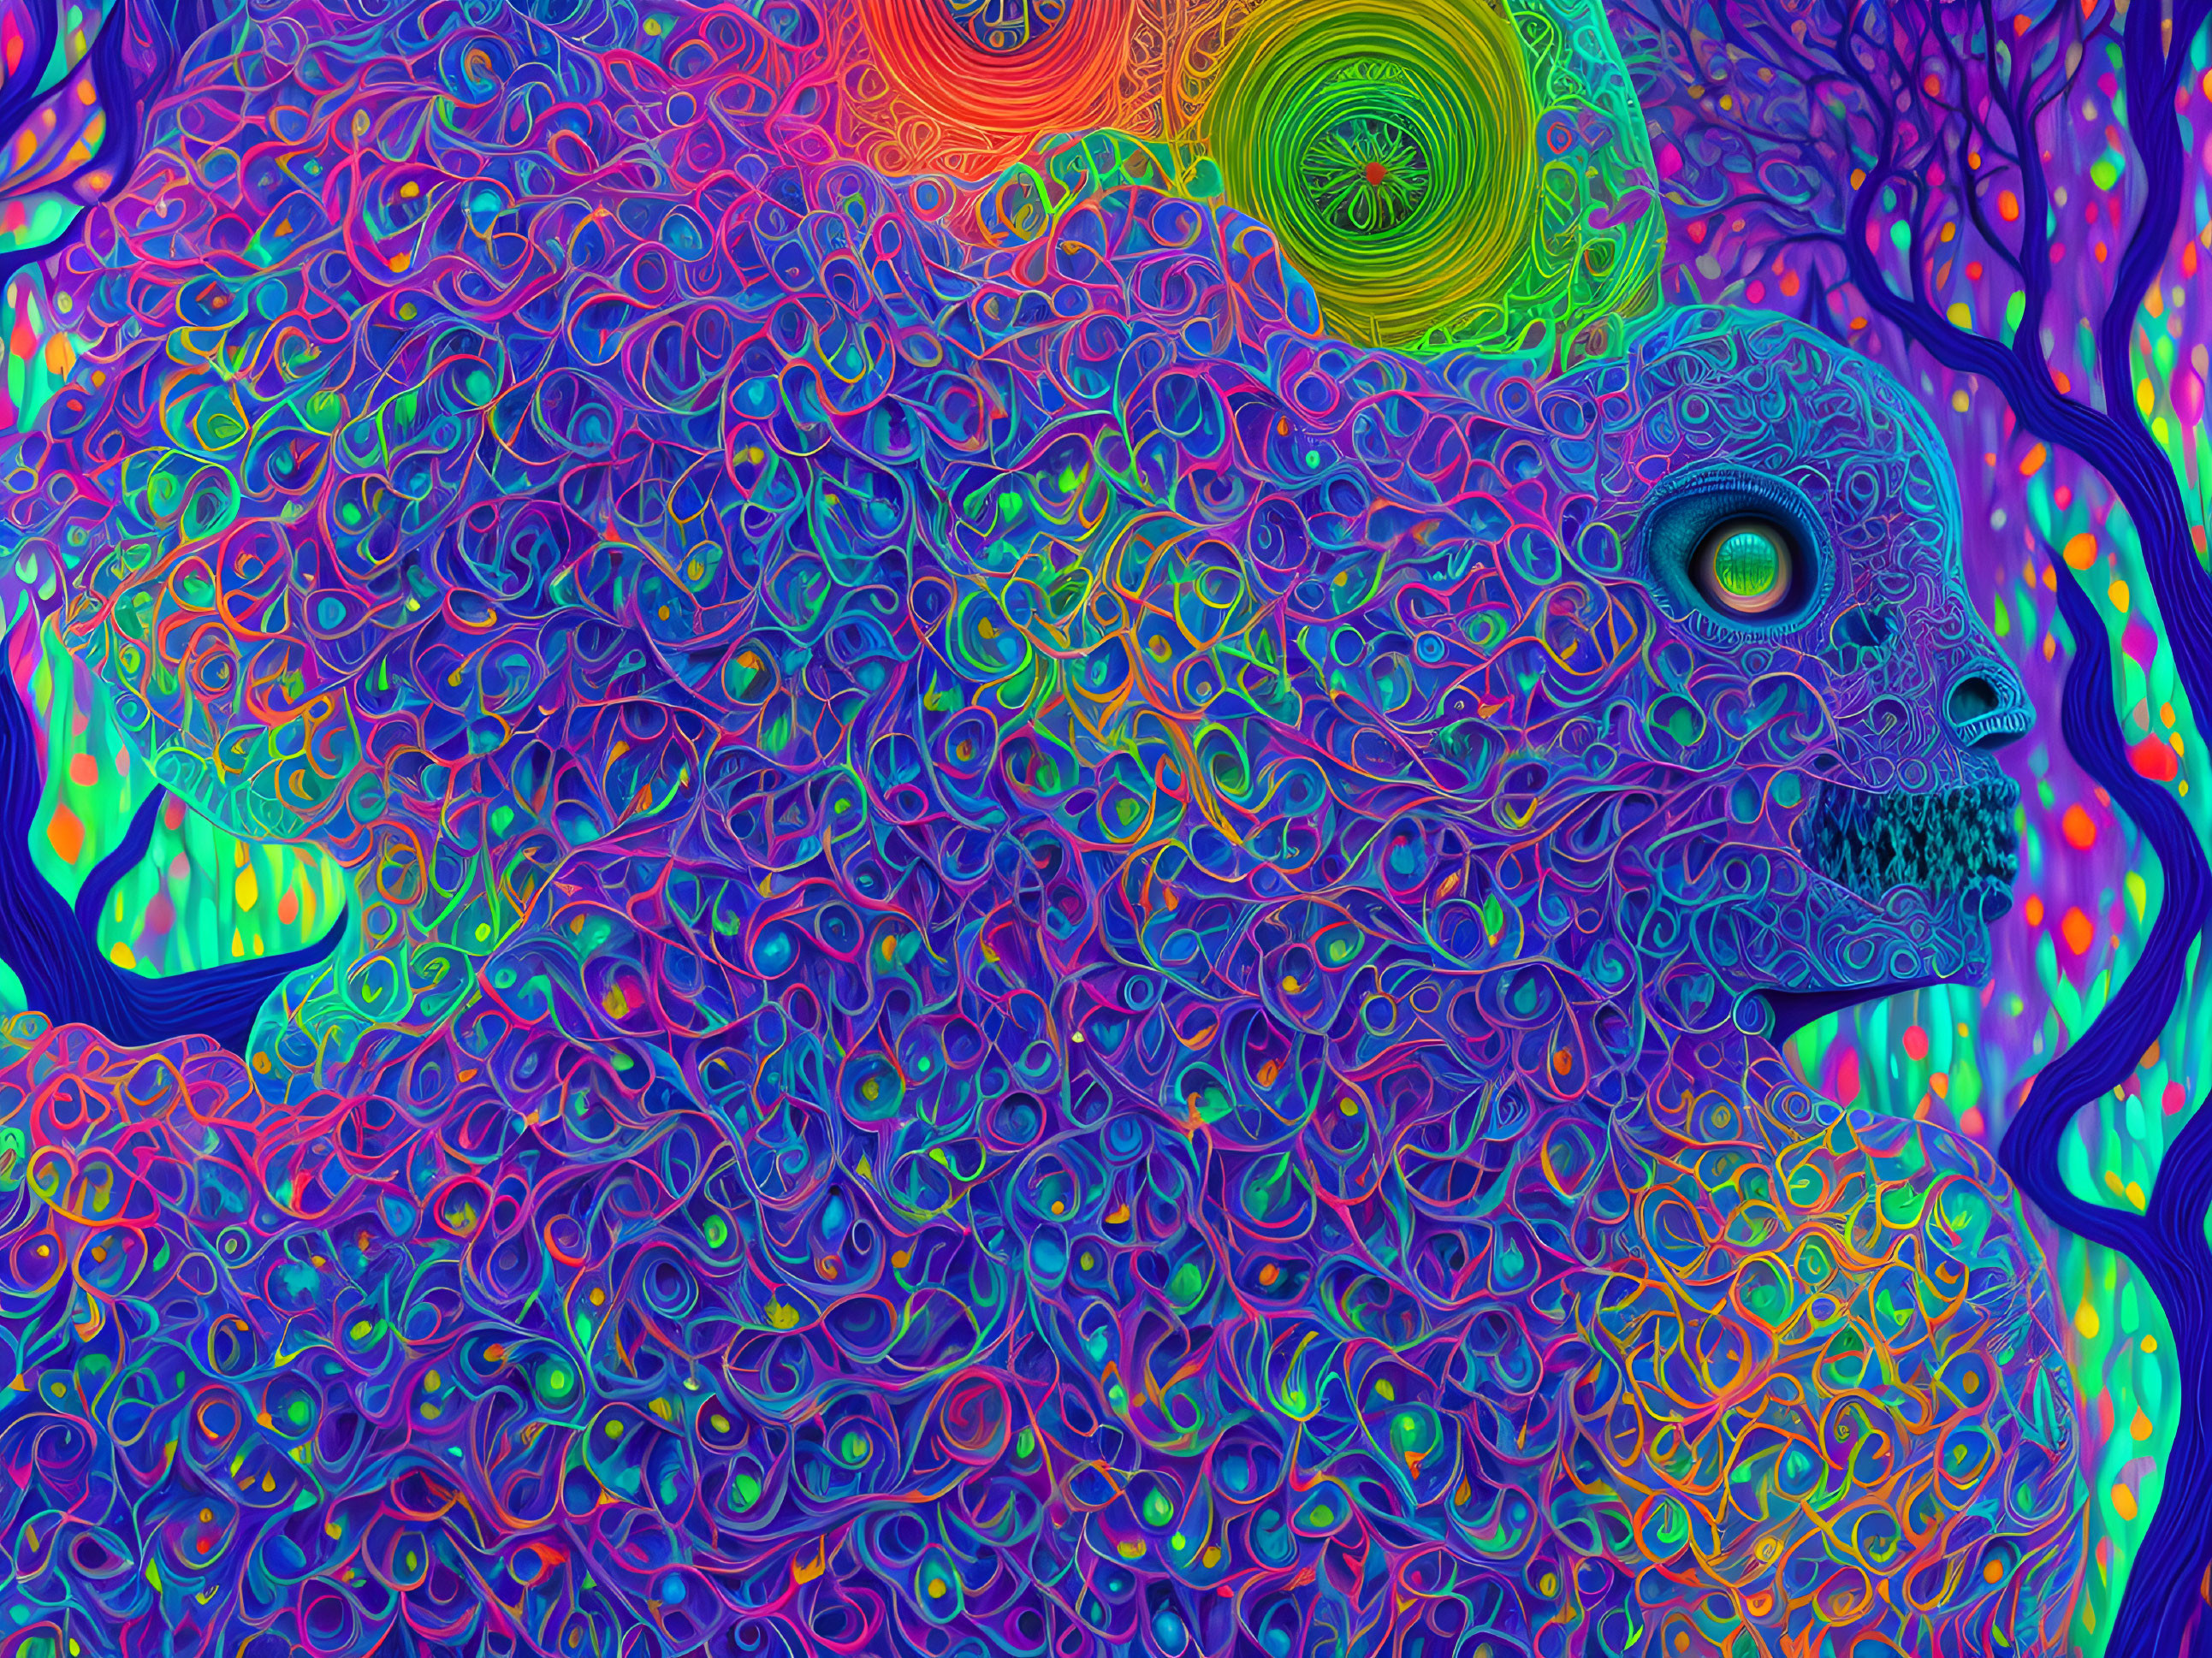 Colorful Abstract Skull Art with Psychedelic Patterns